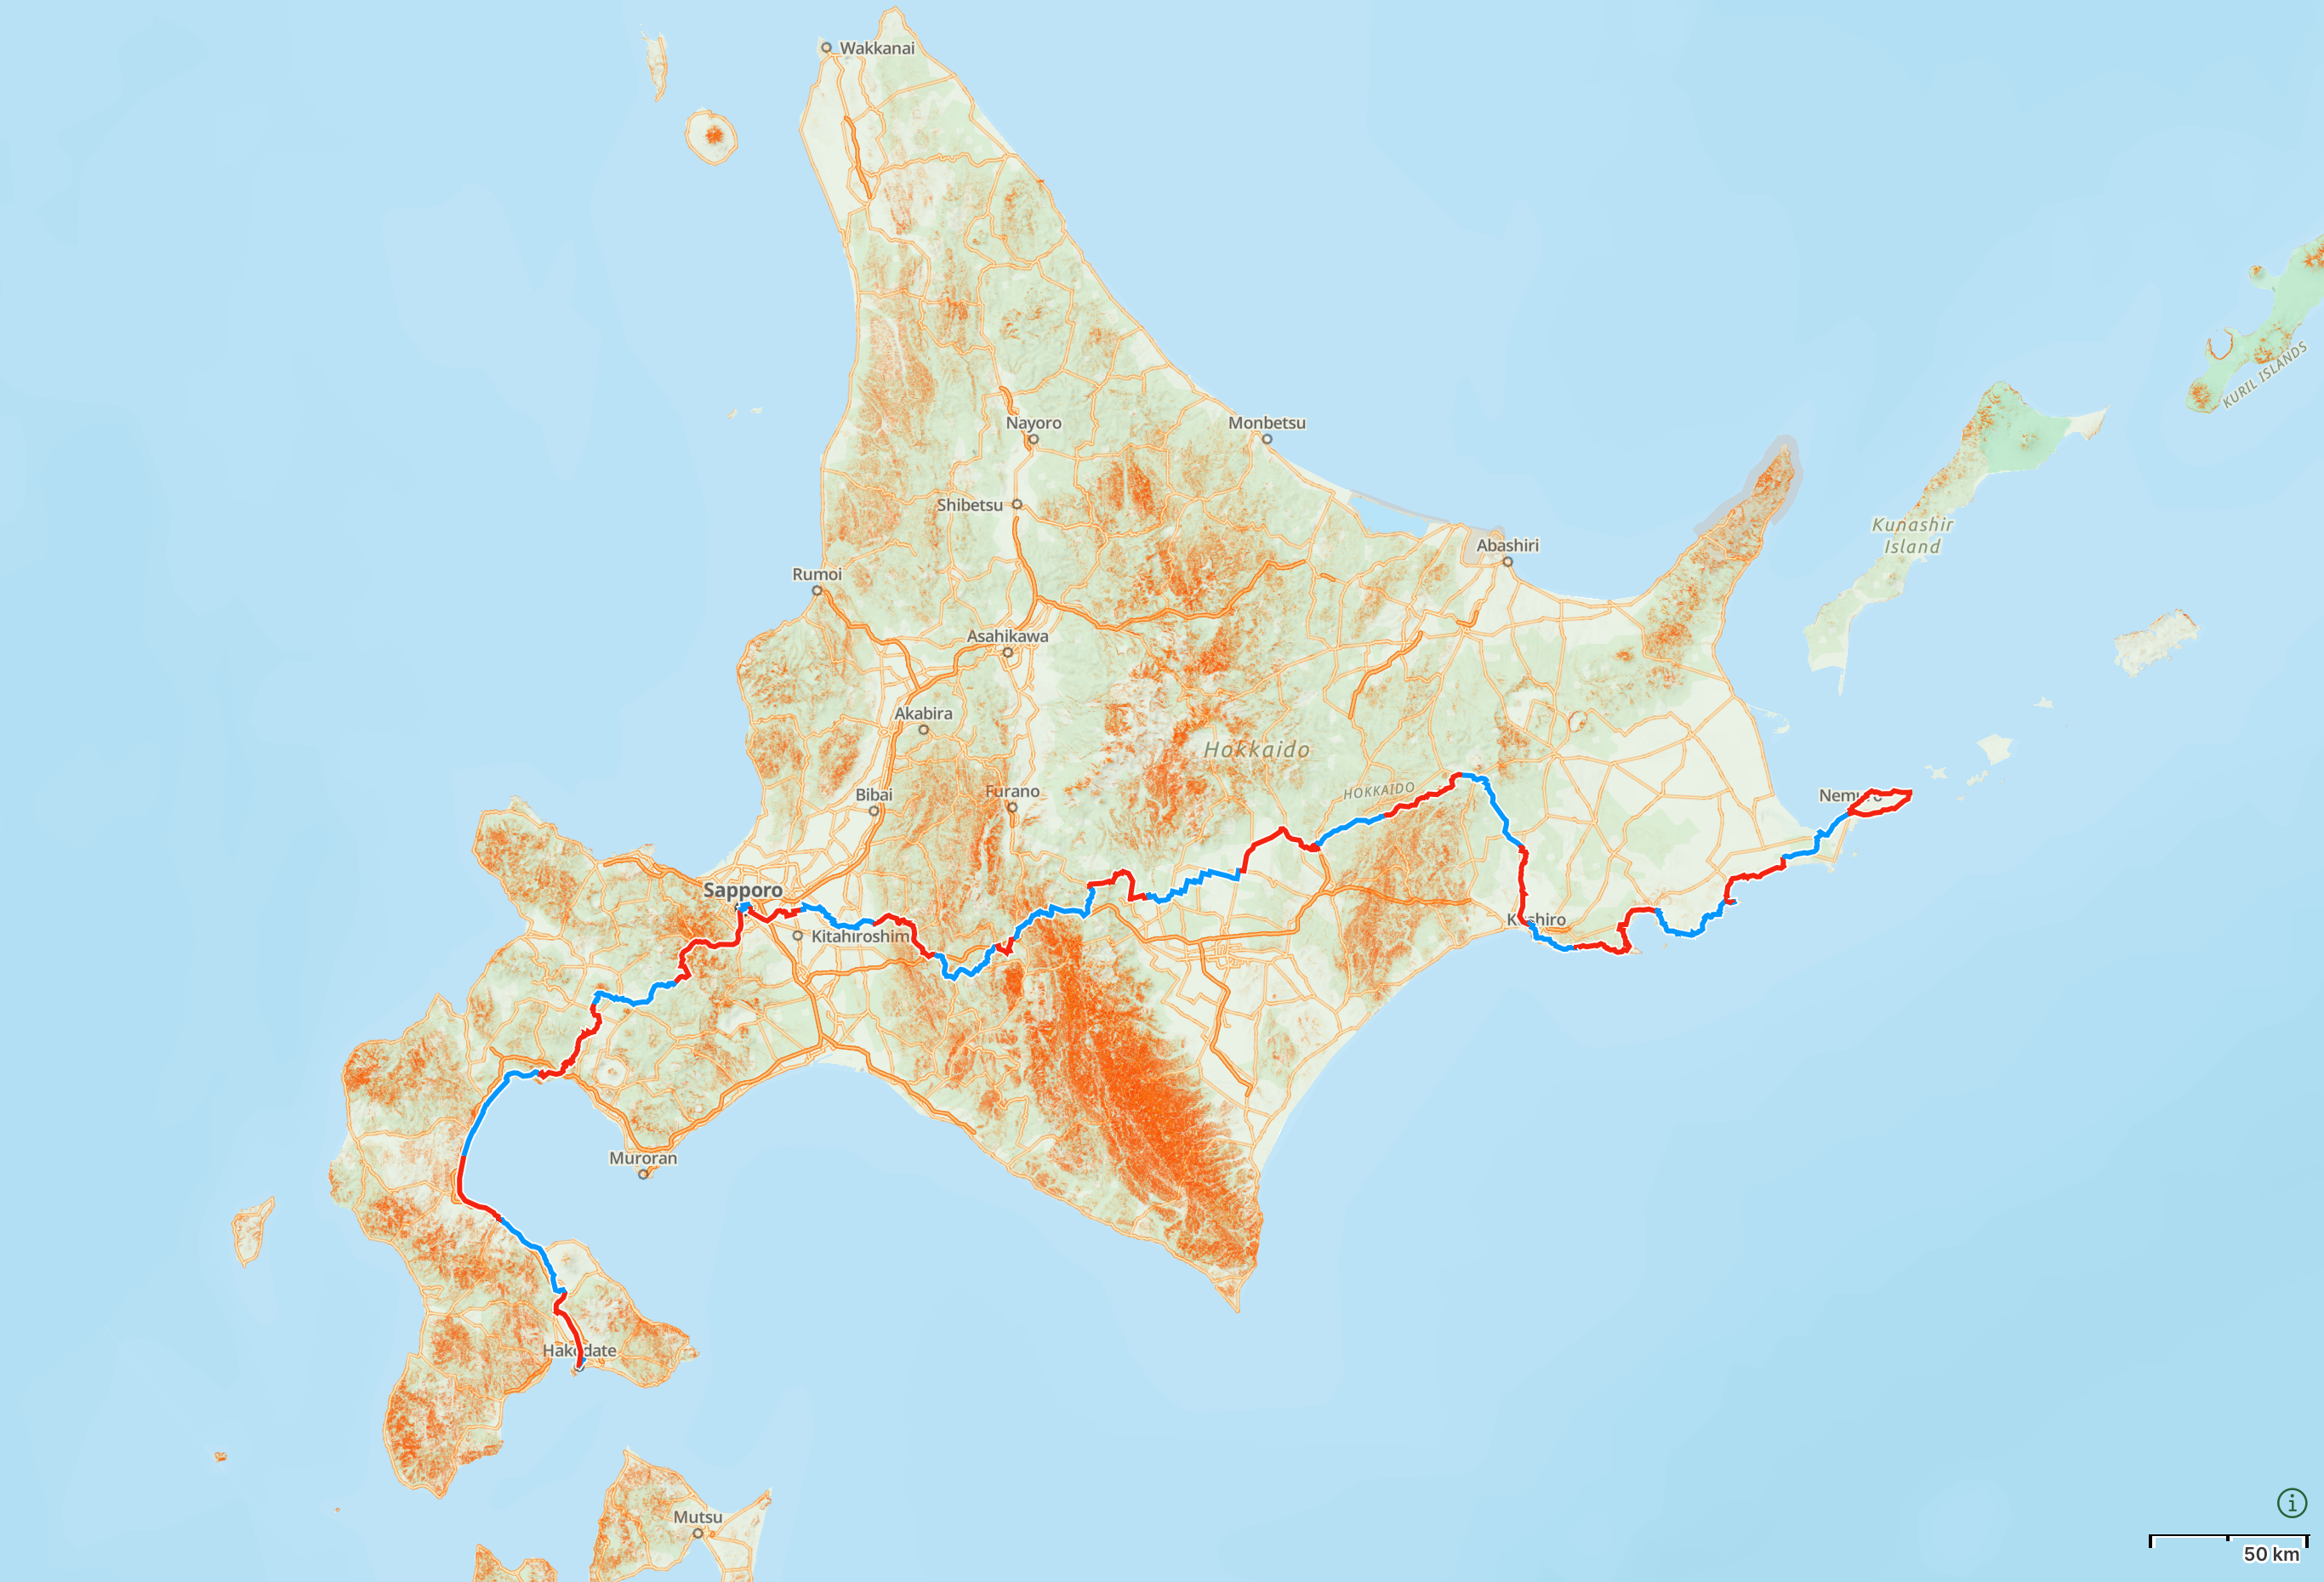 Map of Hokkaido with the route of “These Walking Dreams” highlighted.